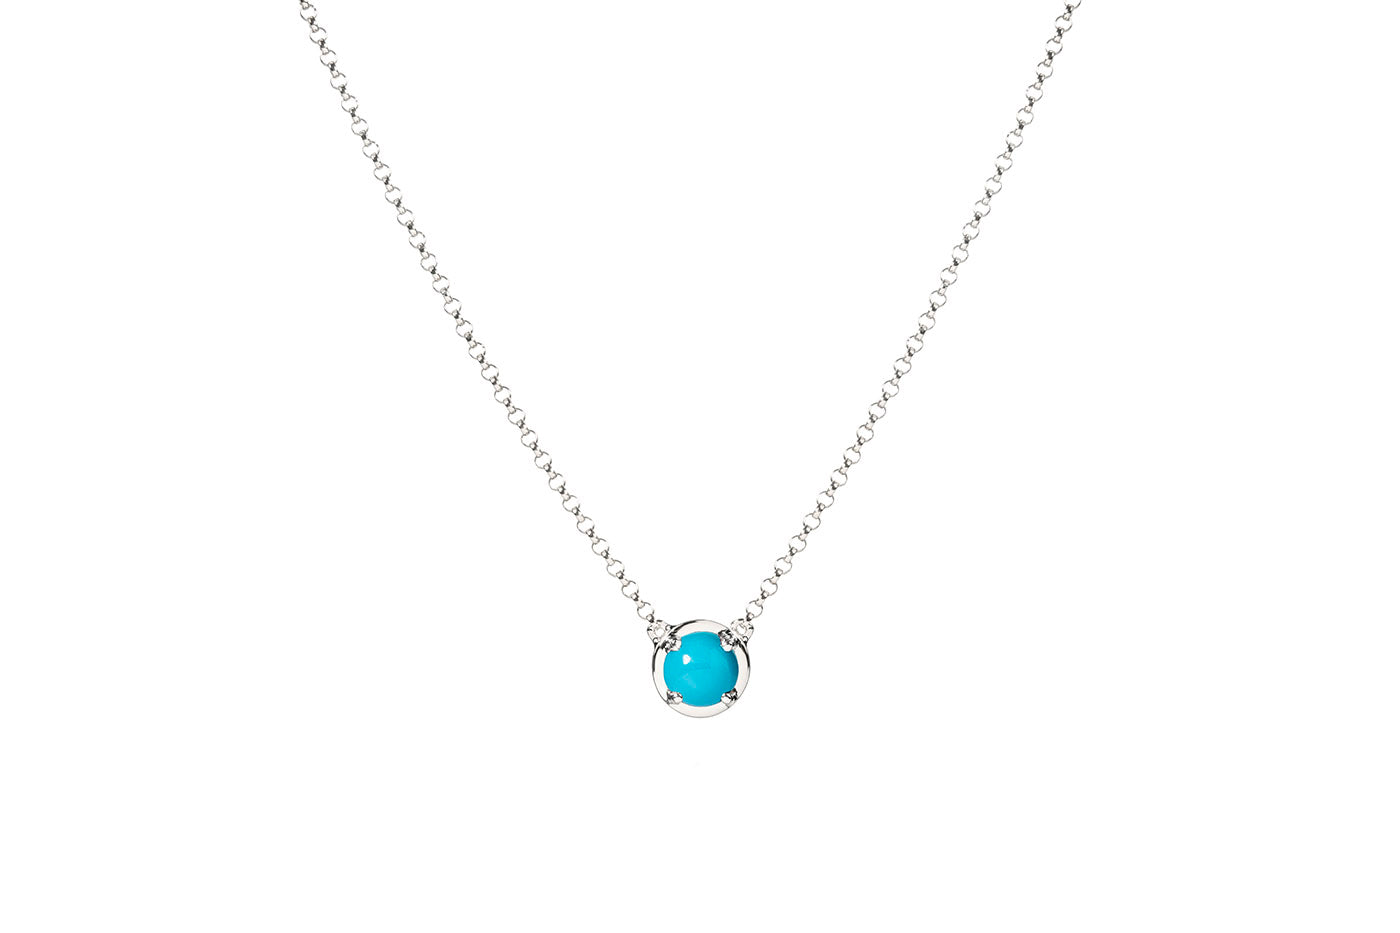 Turquoise December Birthstone Necklace